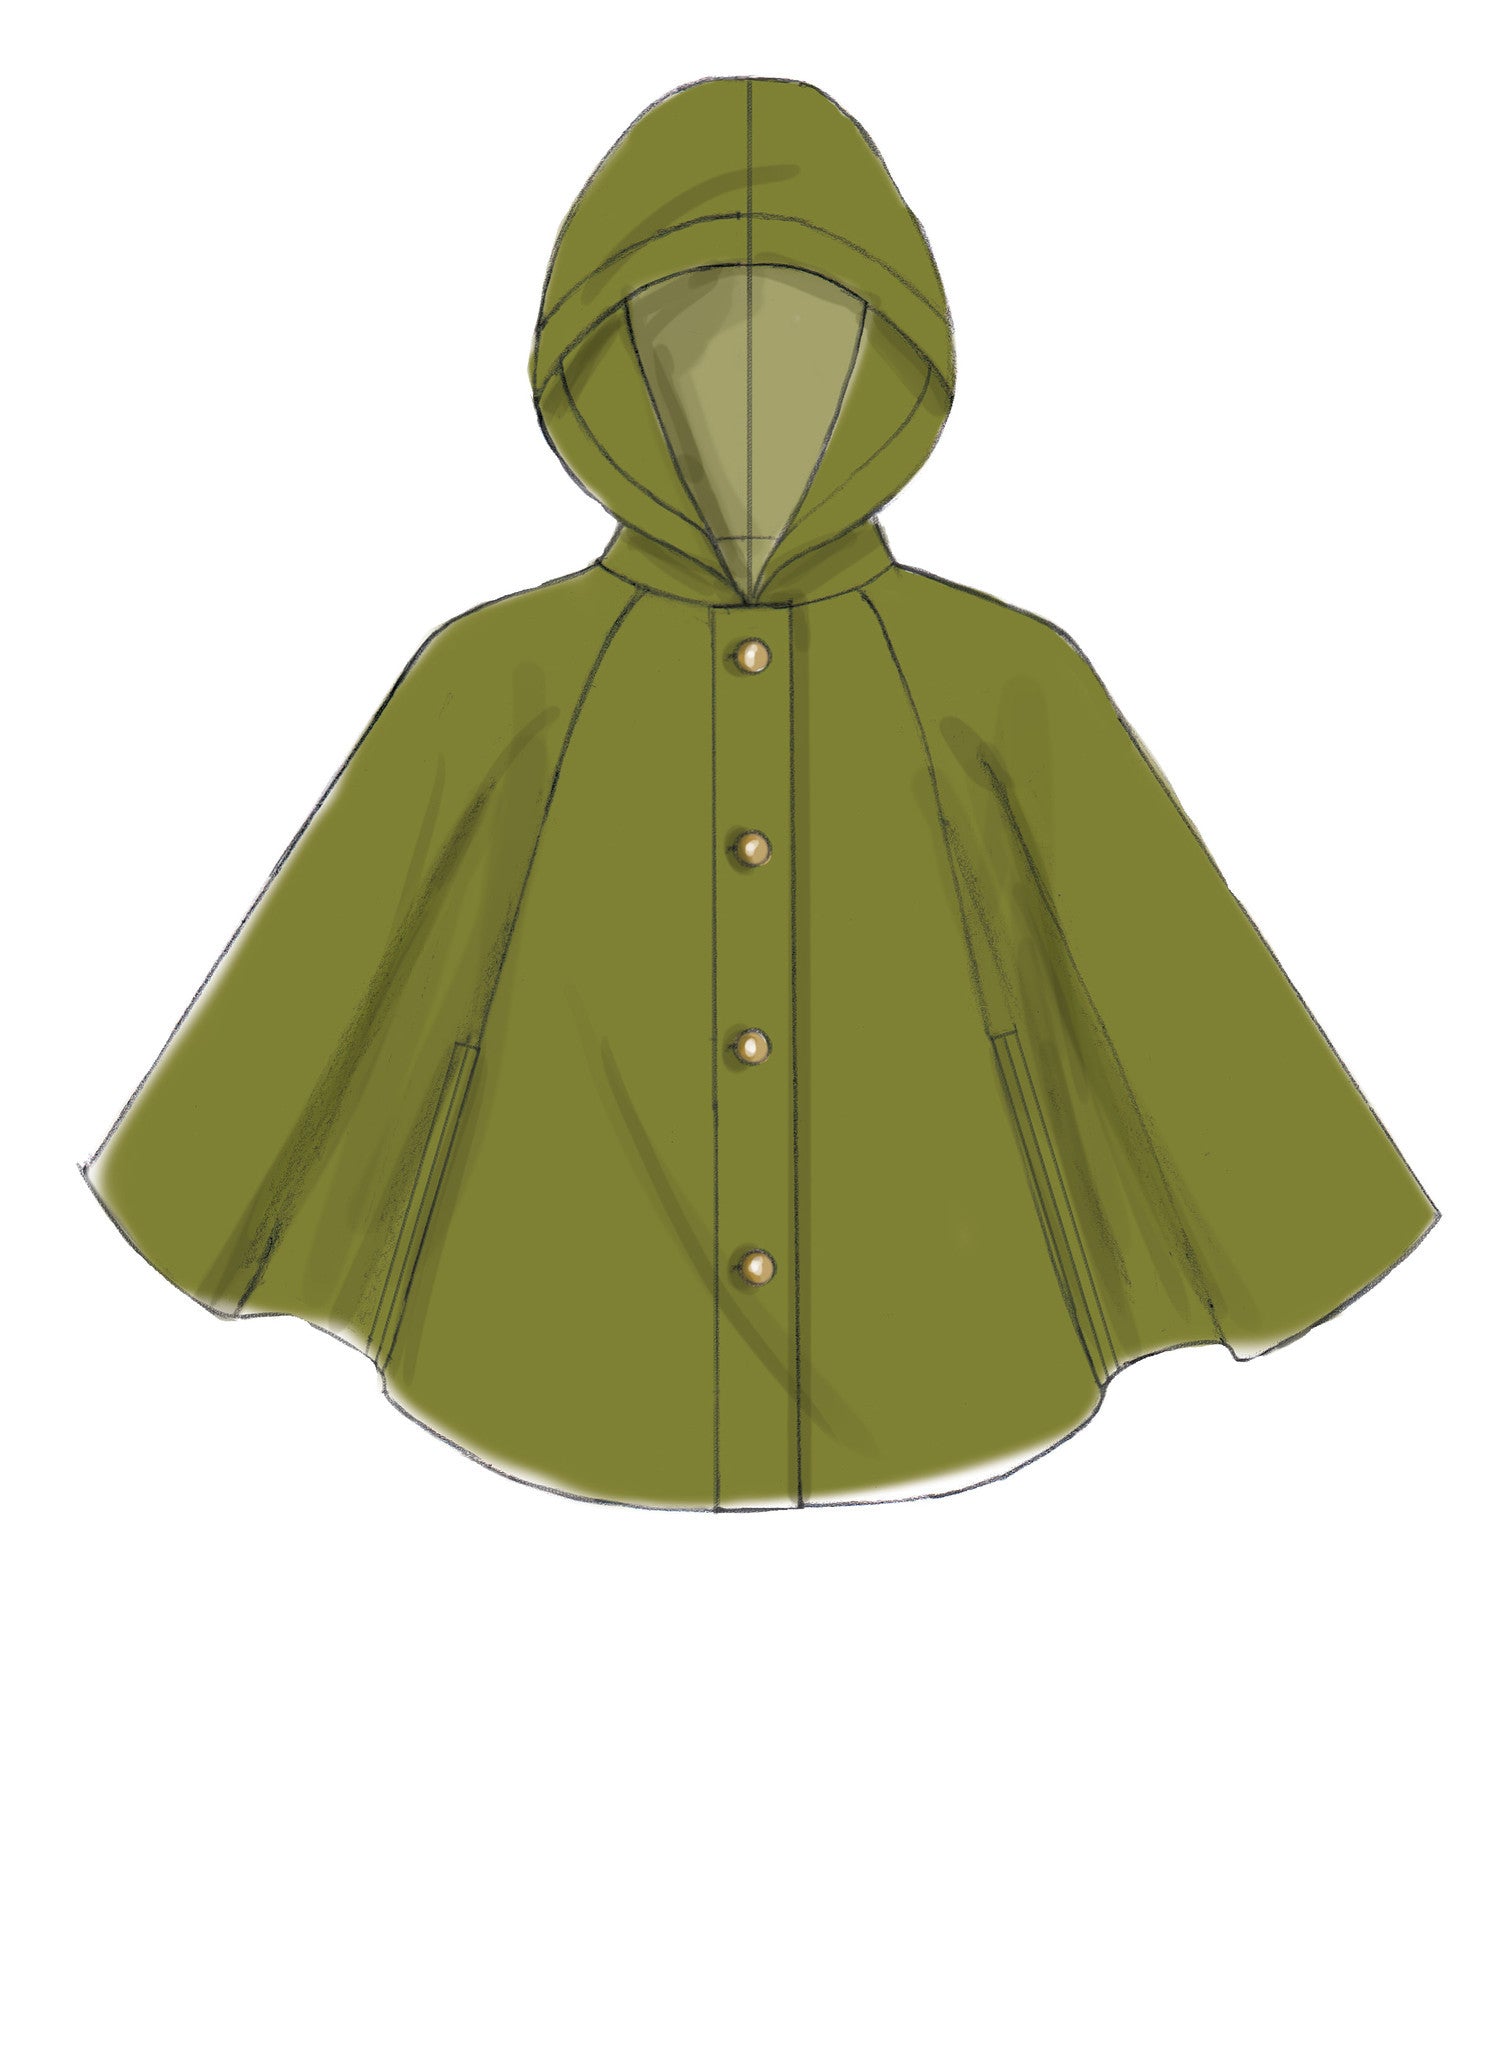 M7477 Misses' Hooded, Collared or Collarless Capes from Jaycotts Sewing Supplies